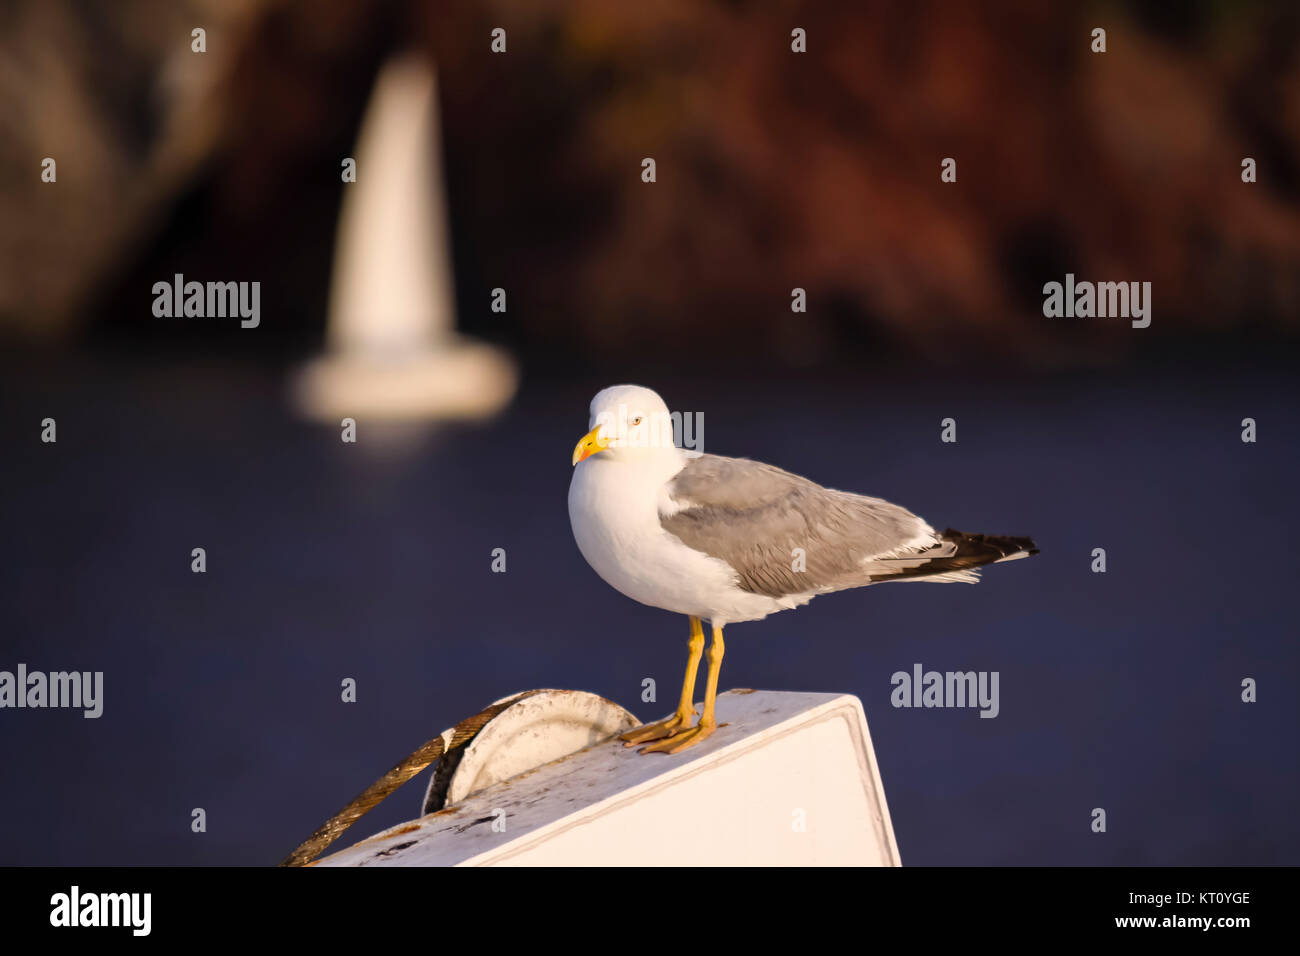 sea gull stands on a boat with a sailboat and coast in the background Stock Photo